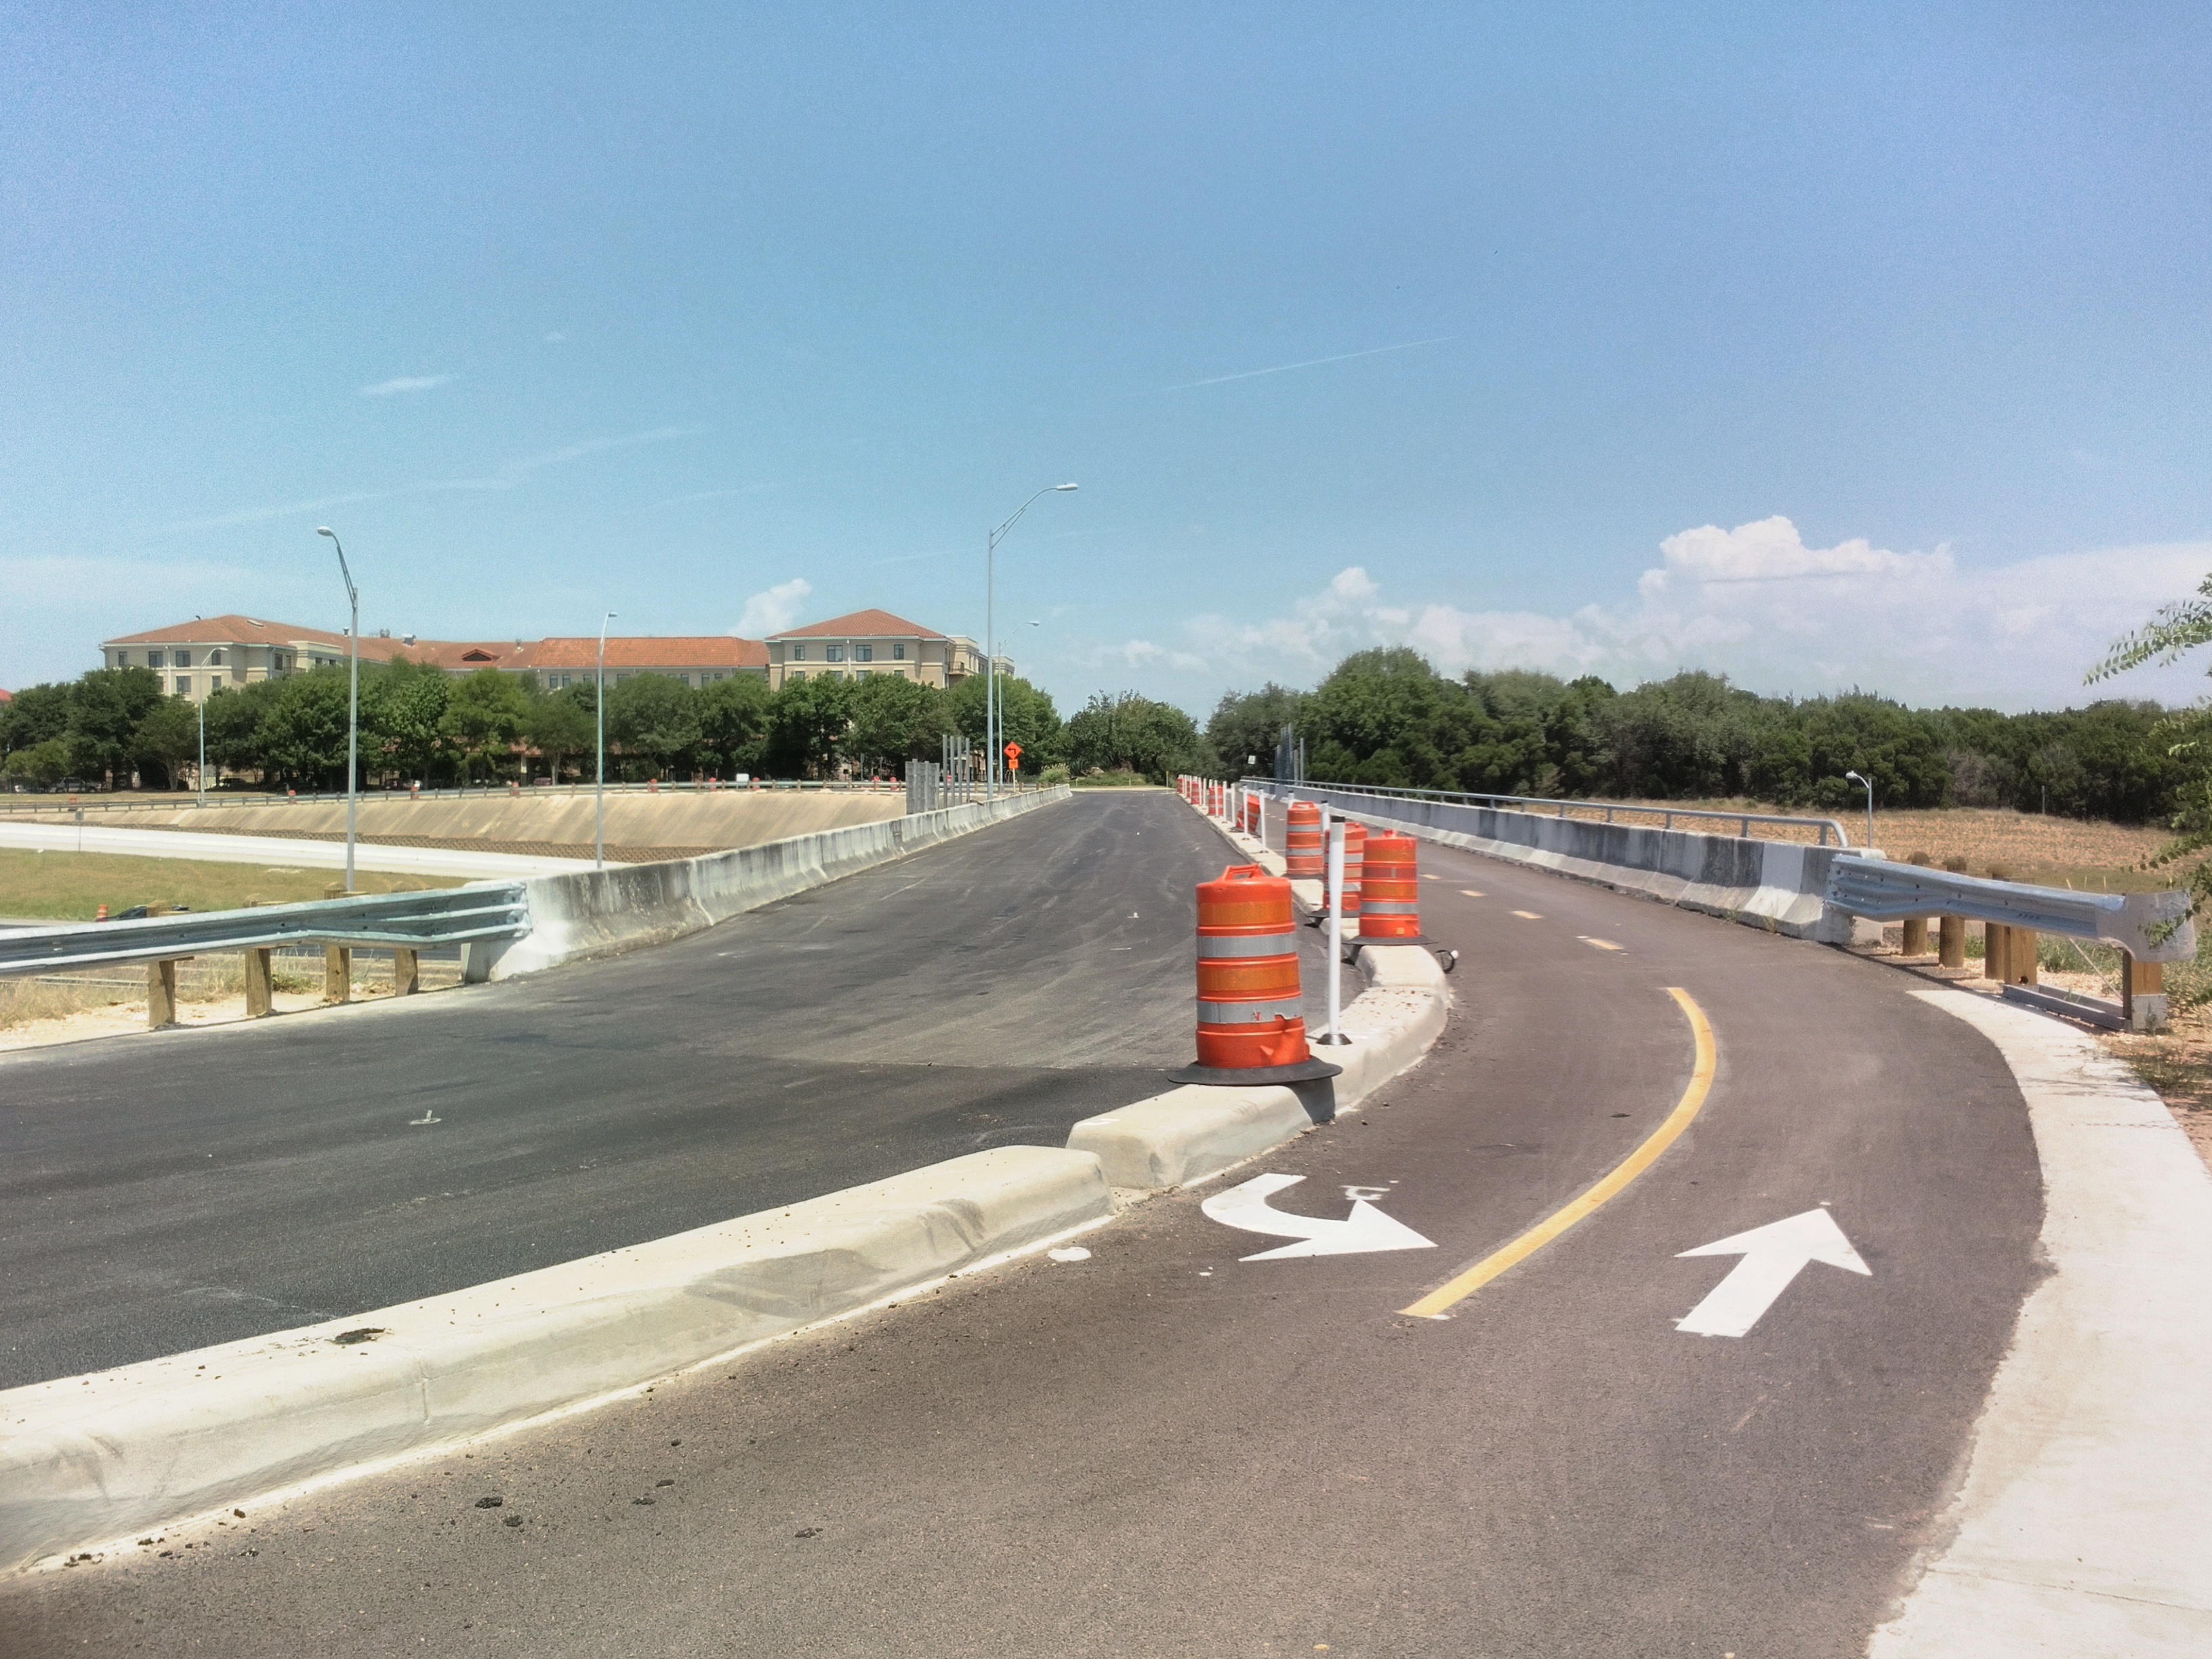 At the junction, the path splits and follows both of MoPac’s one-way frontage roads. This is the Texas turnaround for the southbound direction.